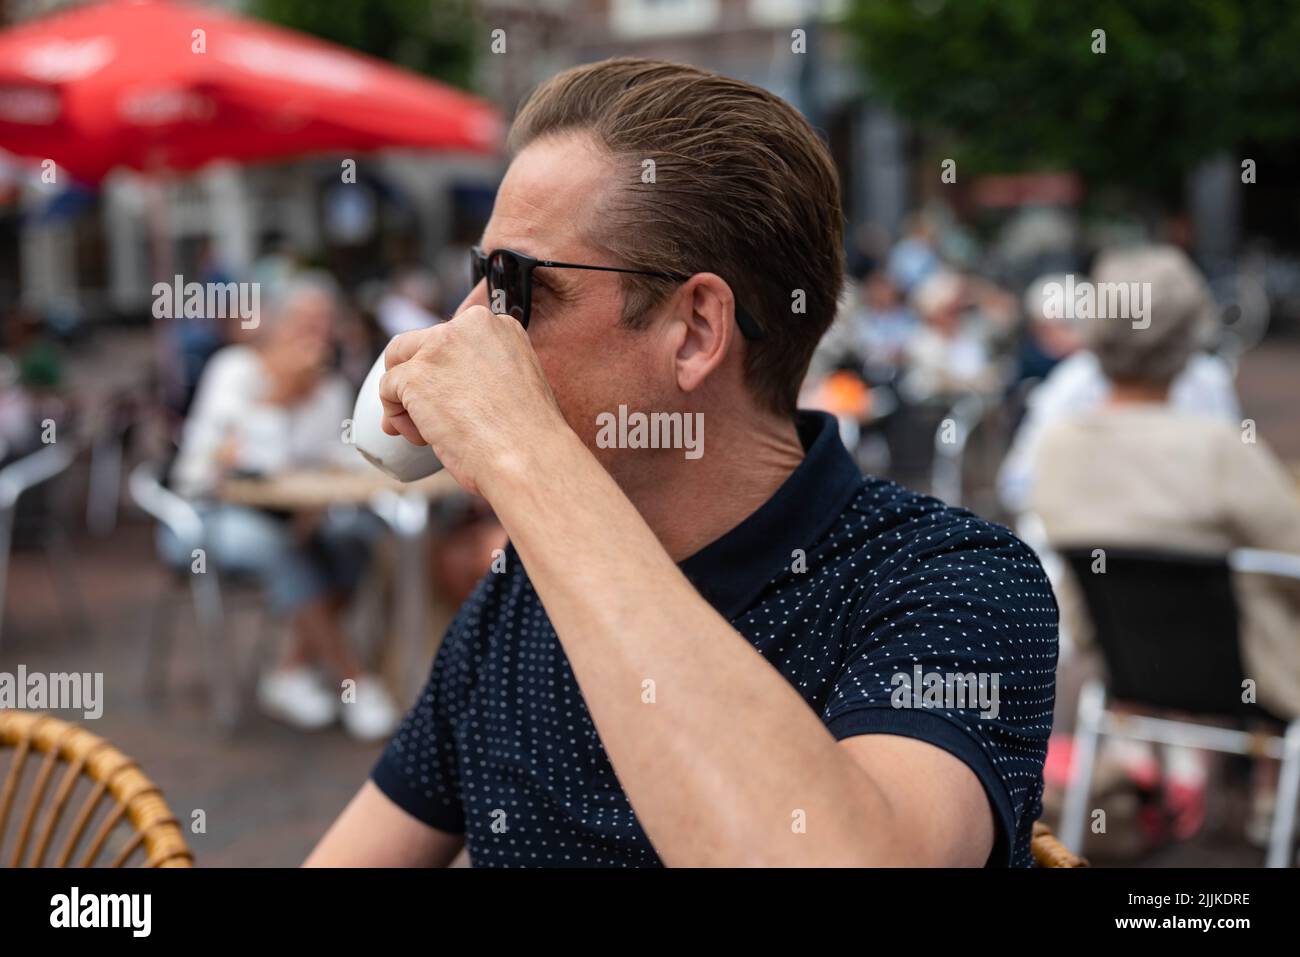 White Caucasian man with sunglasses looks past the camera and drinks coffee from a cup on a terrace during the summer. Stock Photo